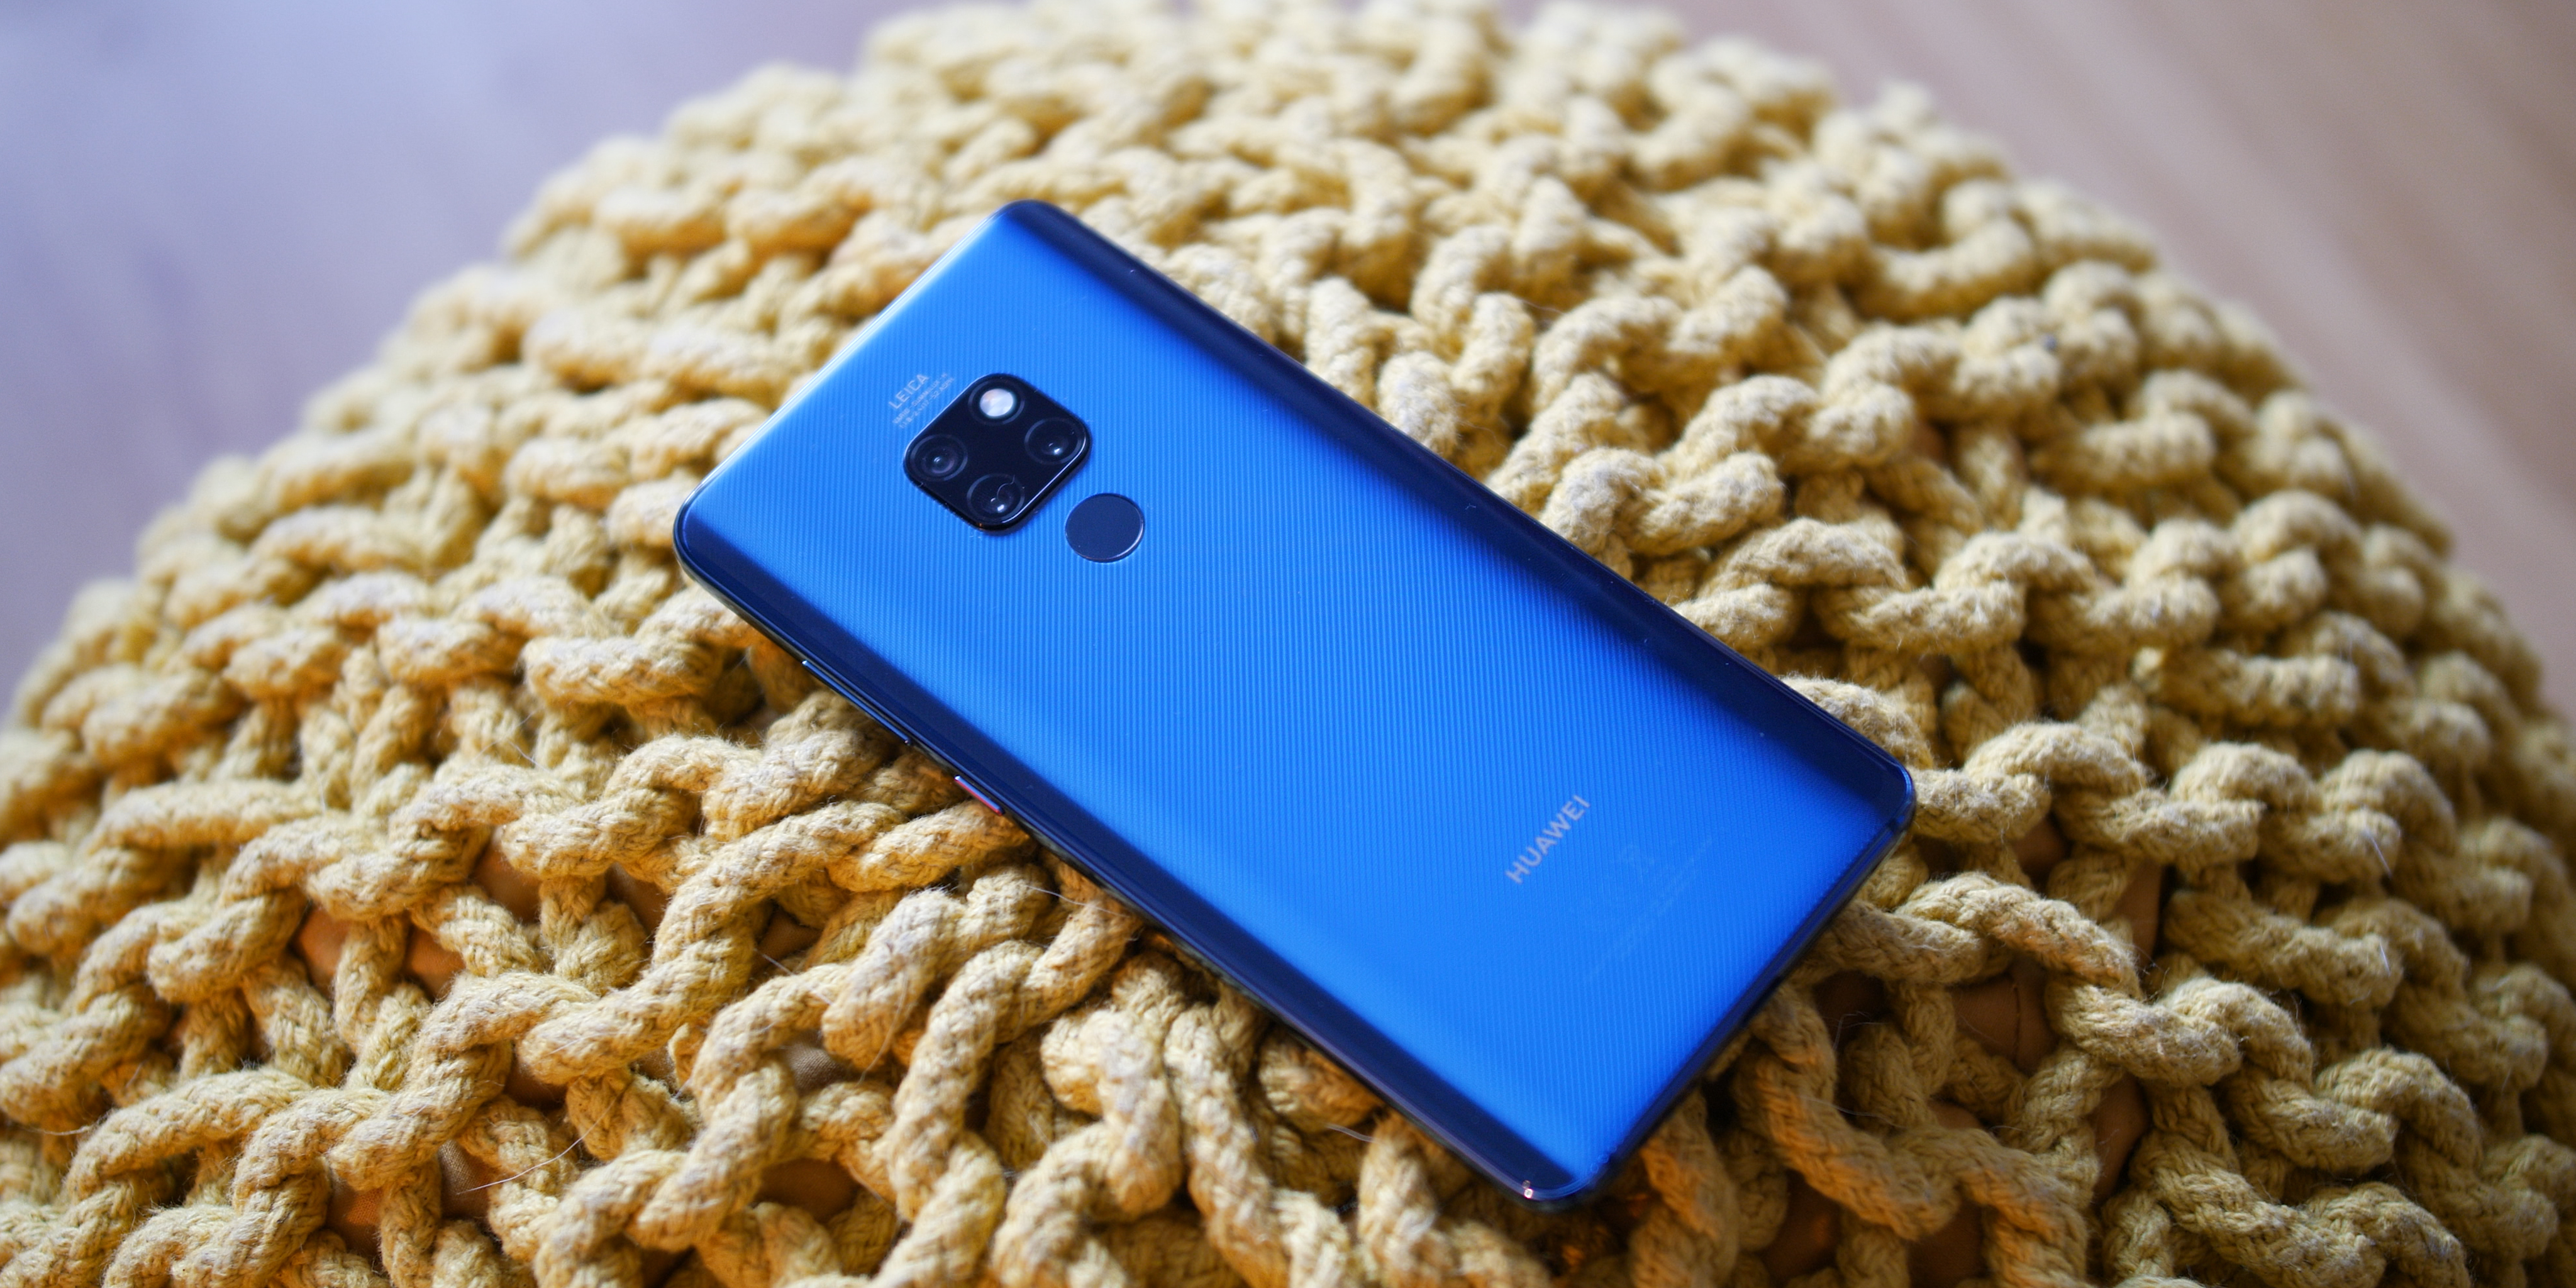 Global Huawei Mate 20 Pro gets year's end EMUI update - Huawei Central